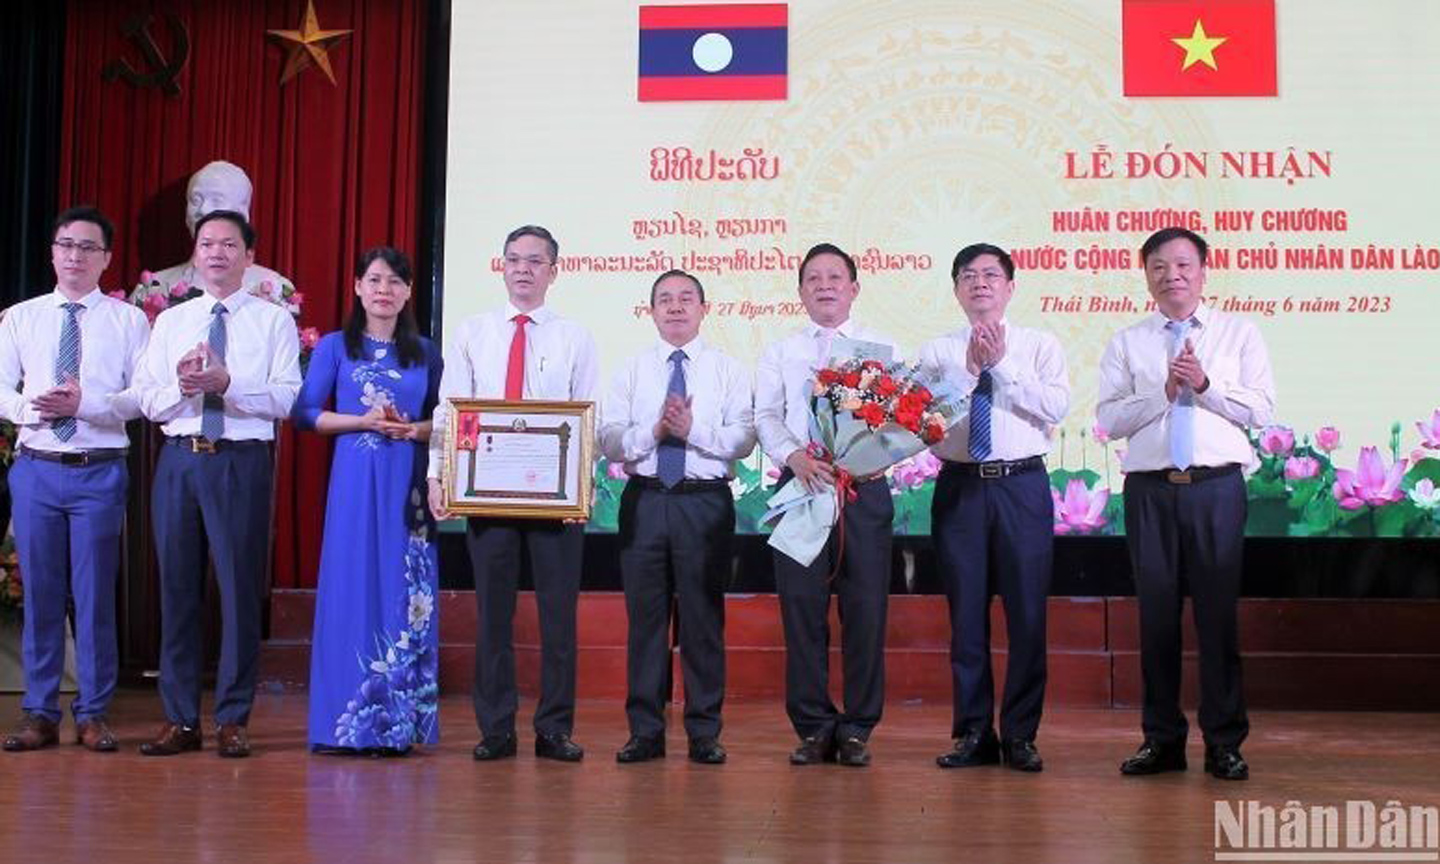 On behalf of the Lao President, the Lao Embassy in Vietnam awarded the Labour Order, first class, to Thai Binh University of Medicine and Pharmacy. (Photo: NDO).